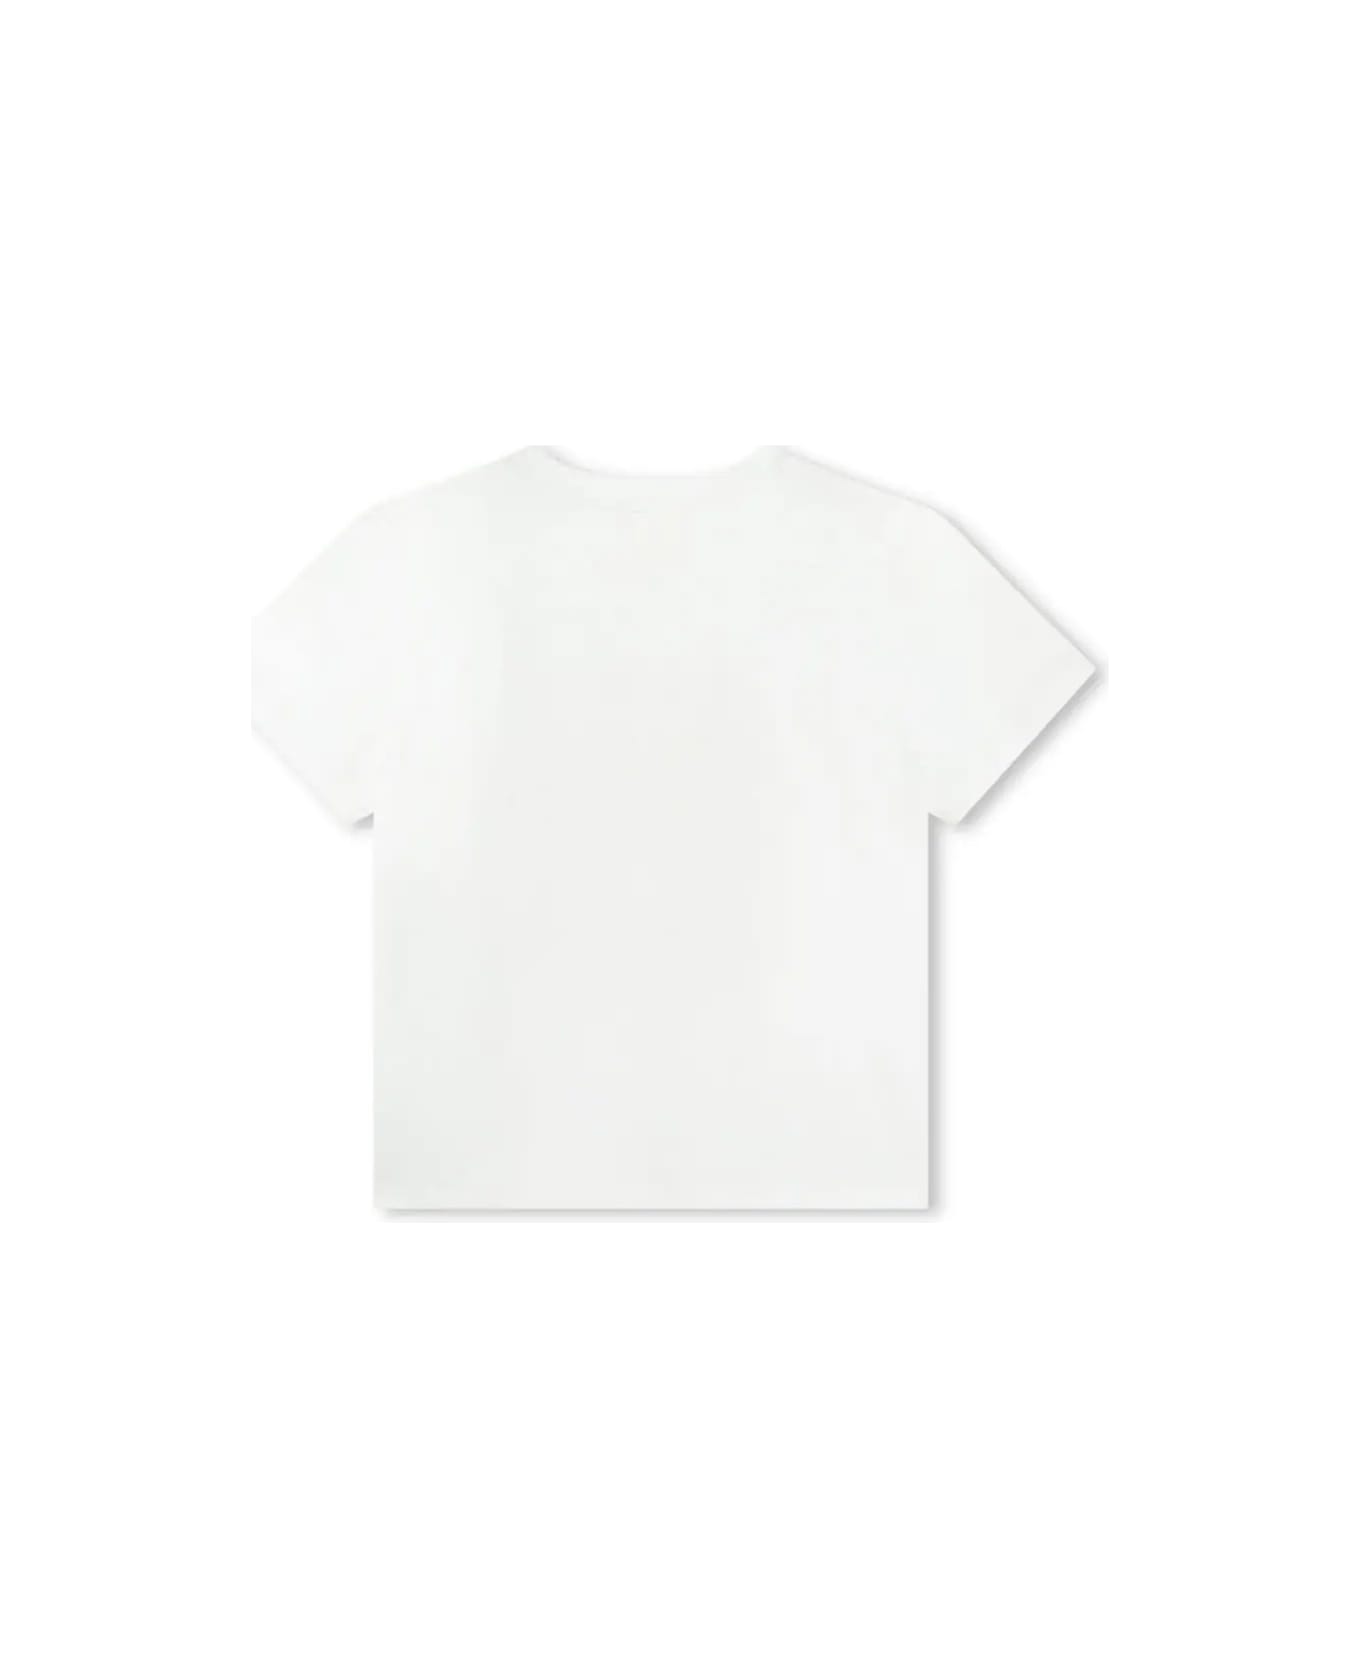 Givenchy White And Gold Givenchy 4g T-shirt - White